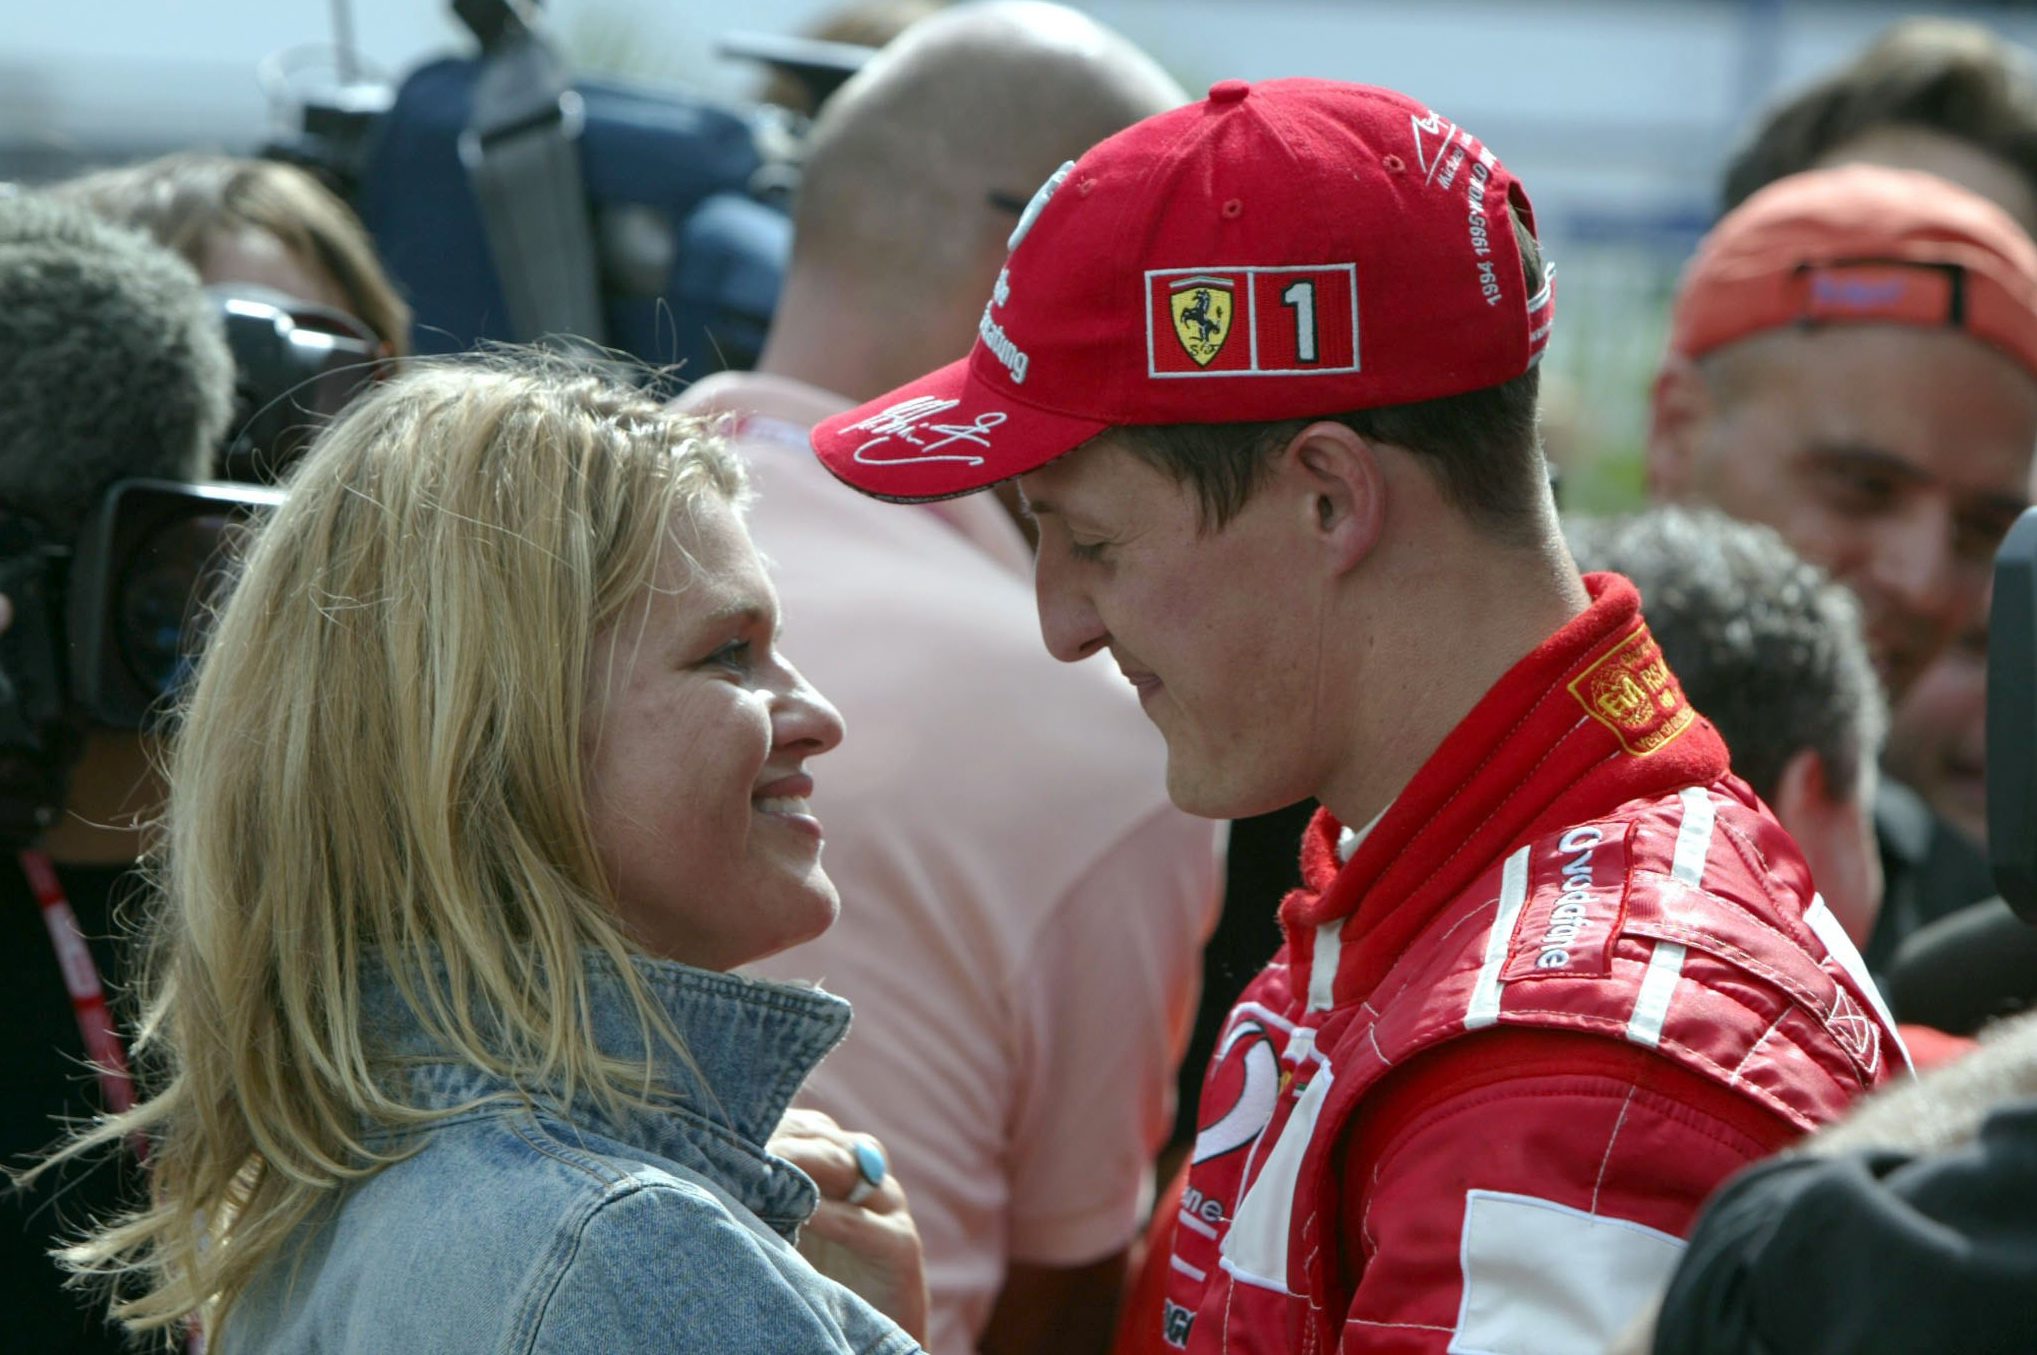 Michael Schumacher (D), Scuderia Ferrari and wife Corinna.
Magny-Cours, France,Image: 181023376, License: Rights-managed, Restrictions: © 2003 MANDATORY CREDIT: WORLD RACING IMAGES. ALL RIGHTS RESERVED: WWW.WORLDRACINGIMAGES.COM, Model Release: no, Credit line: Jad Sherif / MAXPPP / Profimedia